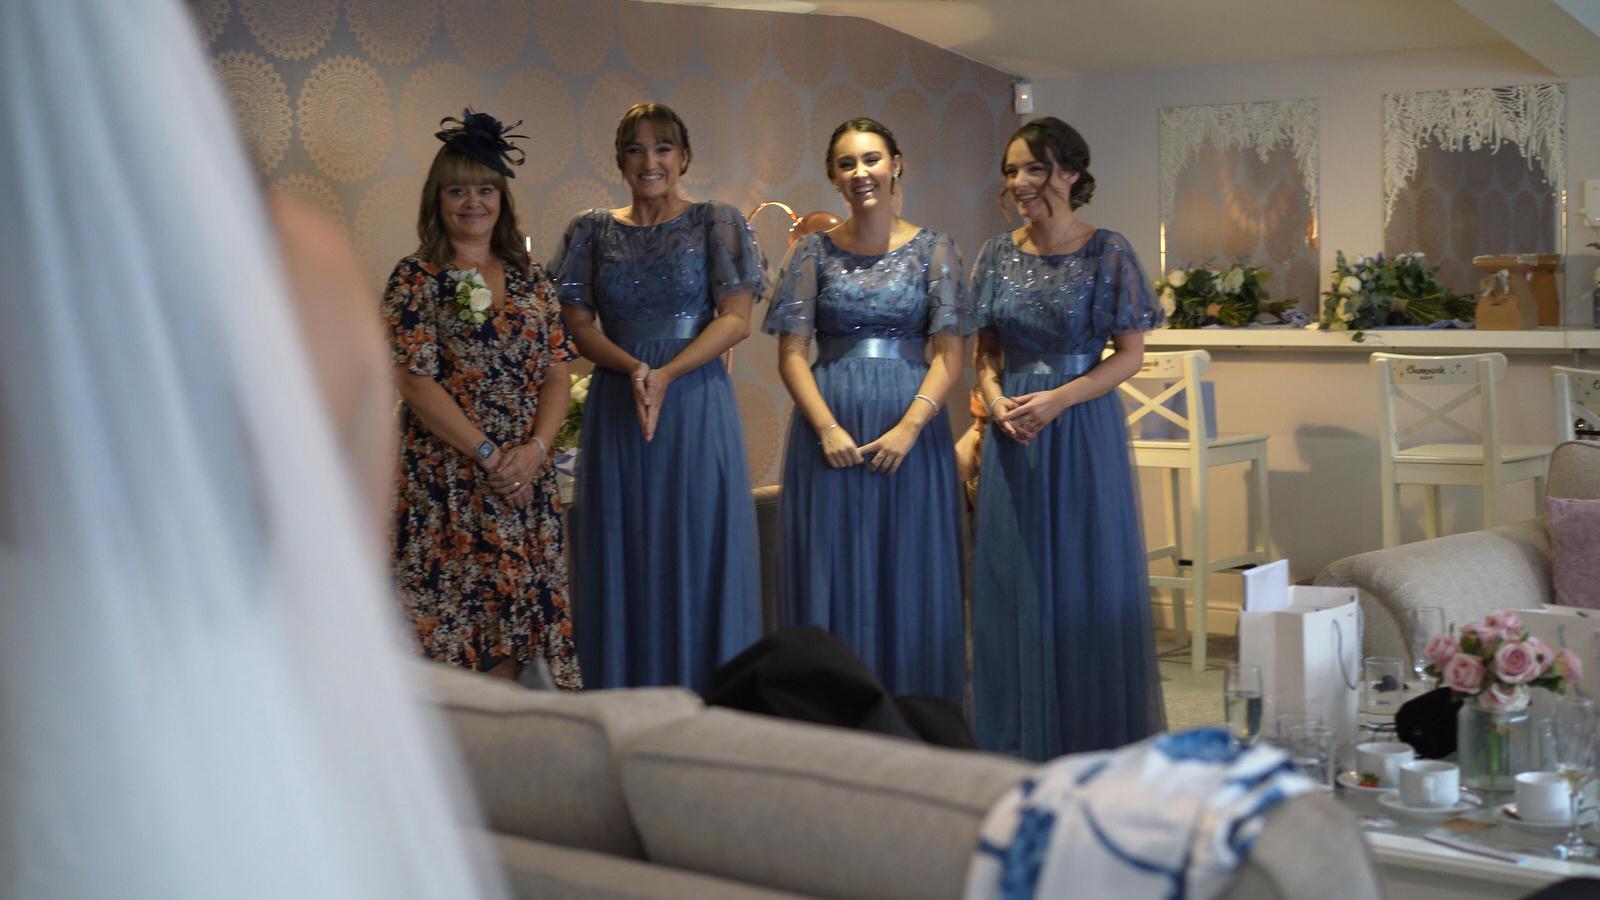 the bridesmaids react to the bride being ready